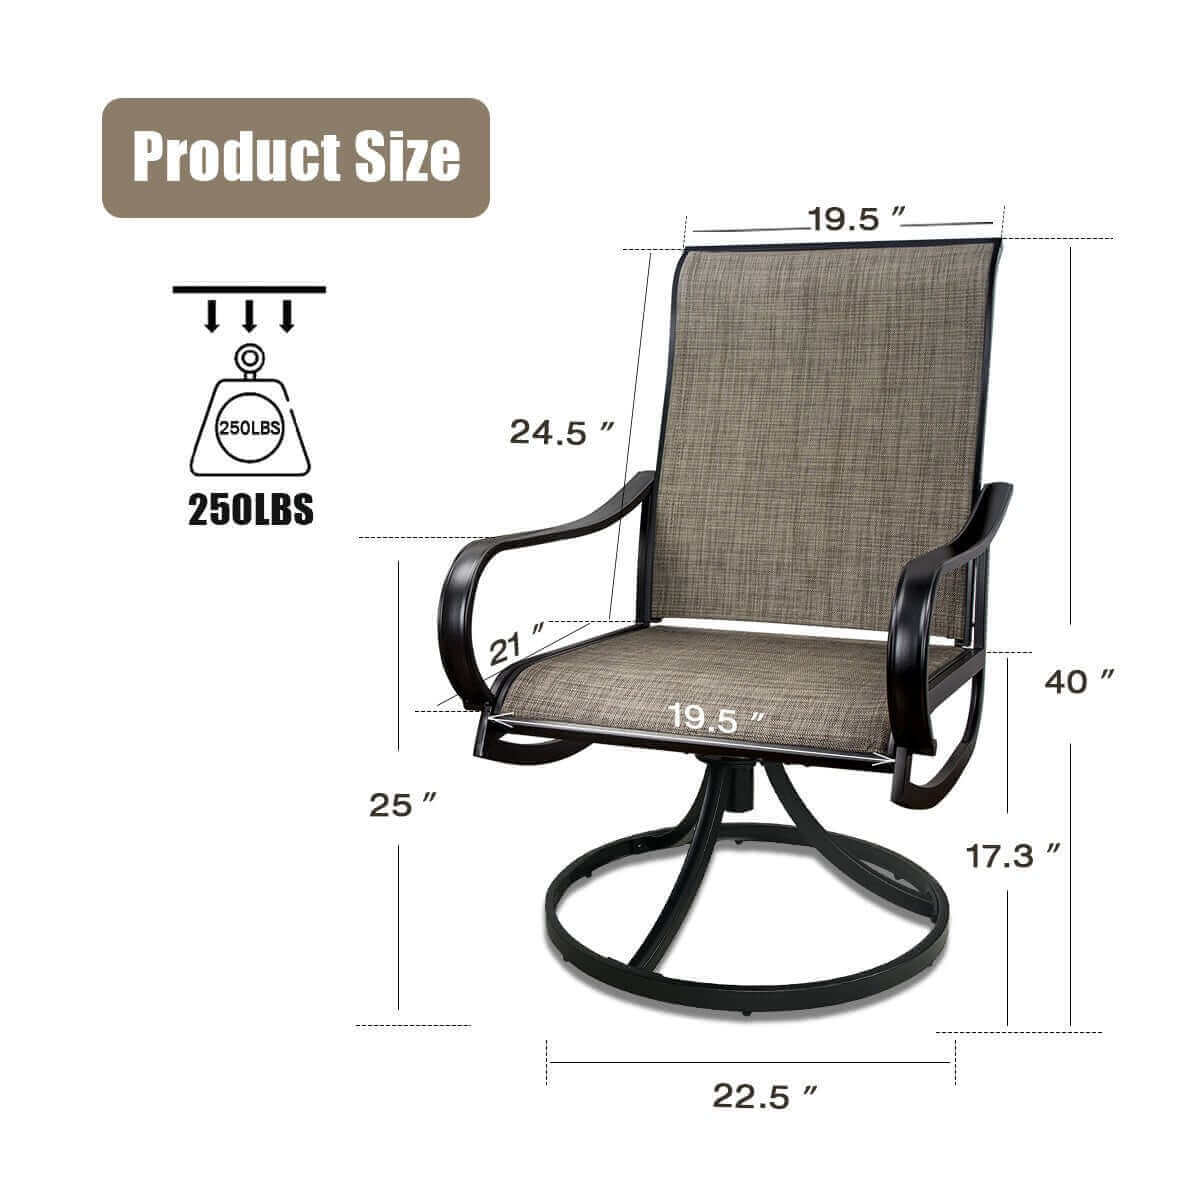 Textilene Outdoor Swivel Chairs; 4PCS Mesh Fabric Weather Resistant